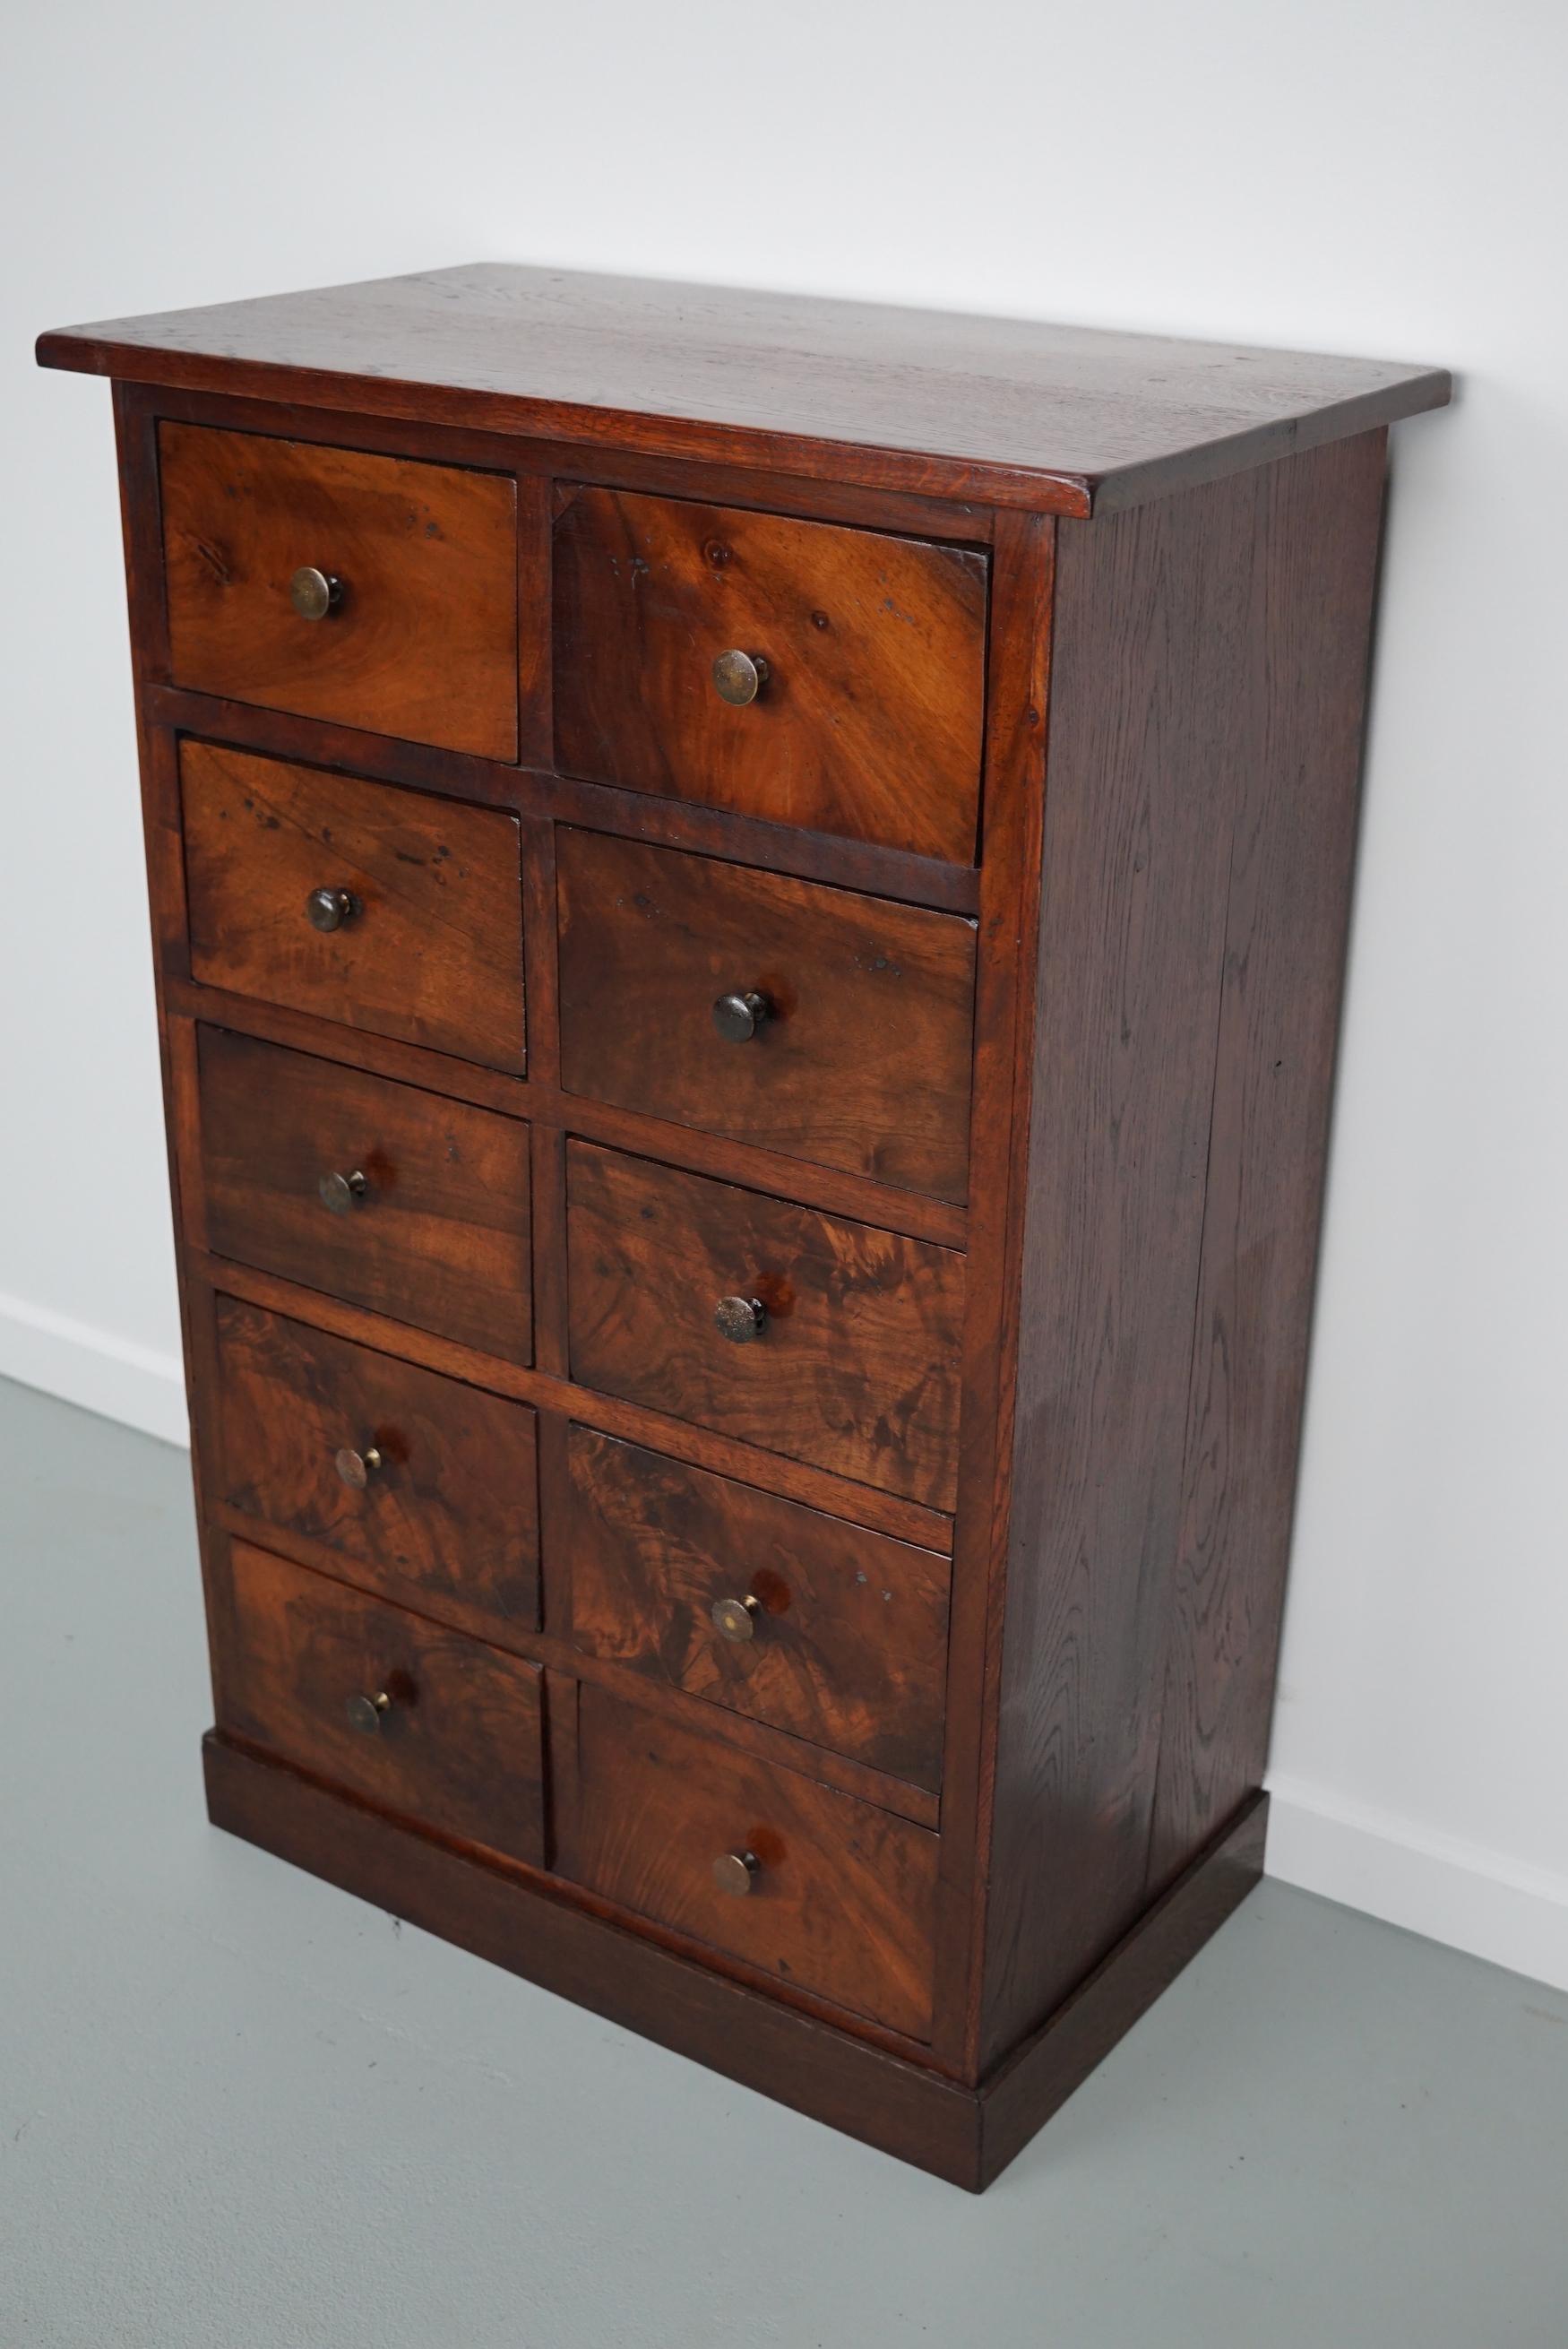 This cabinet was made around the second half of the 19th century from flower mahogany and oak. It was used to store herbs and medicine. It remains in a good and functional condition. The interior dimensions of the drawers measure: D 30 x W 22 x H 13